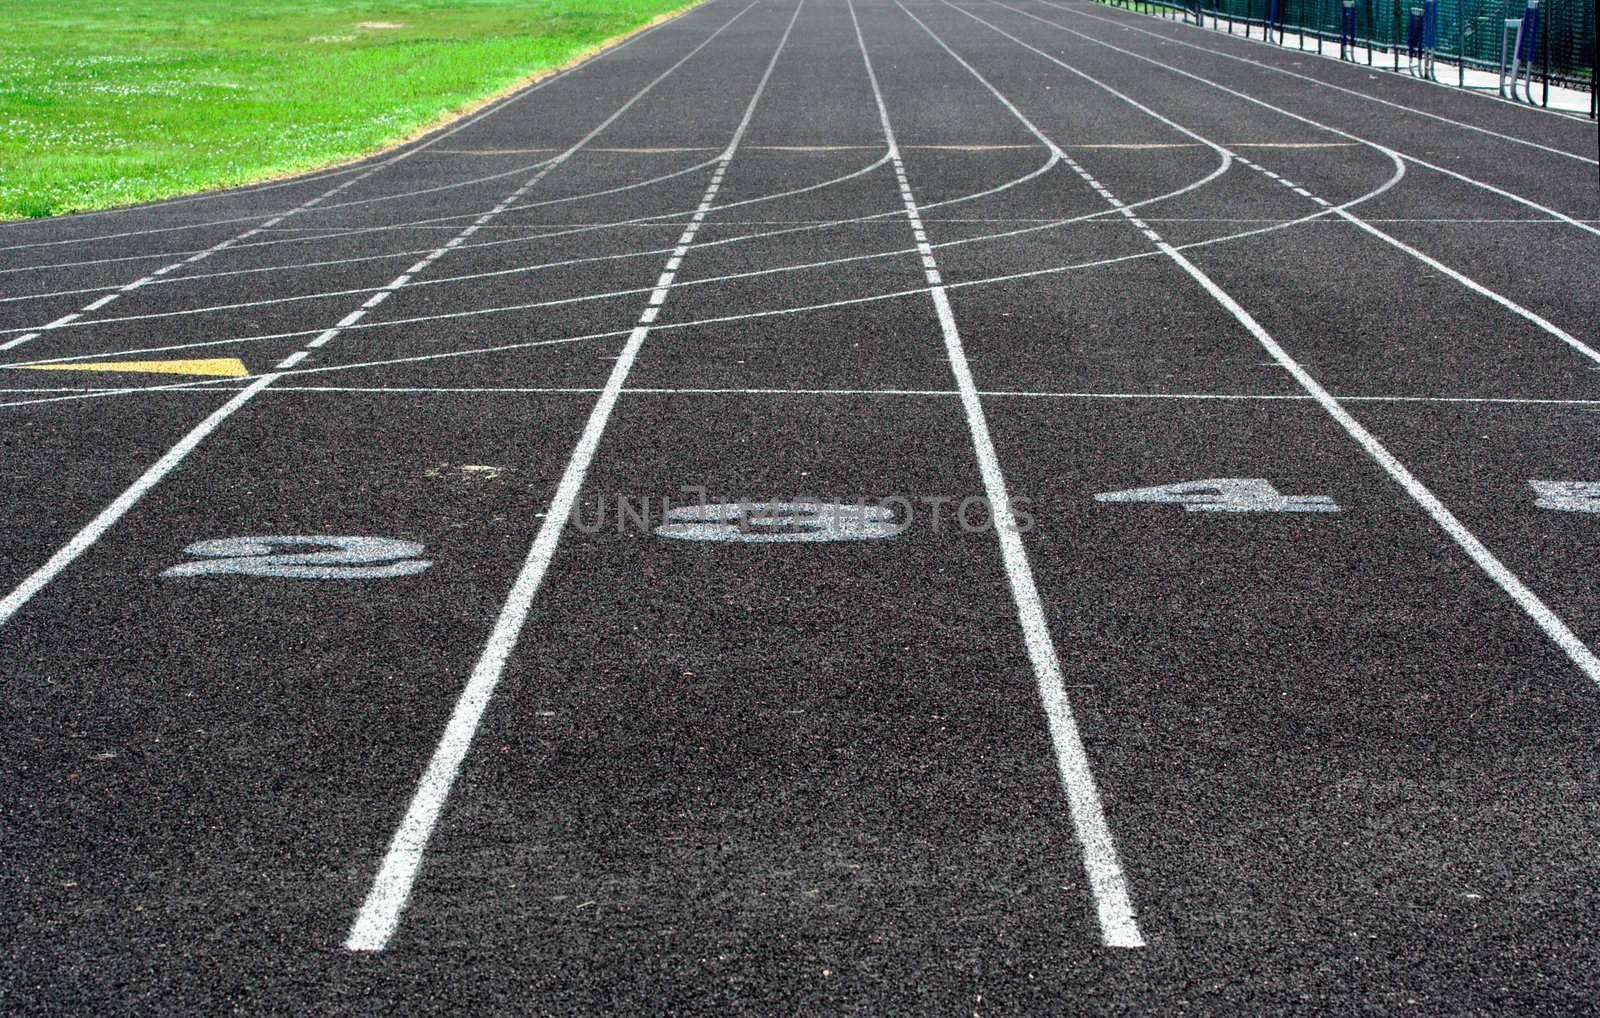 A portion of a track showing lane numbers 2, 3, and 4